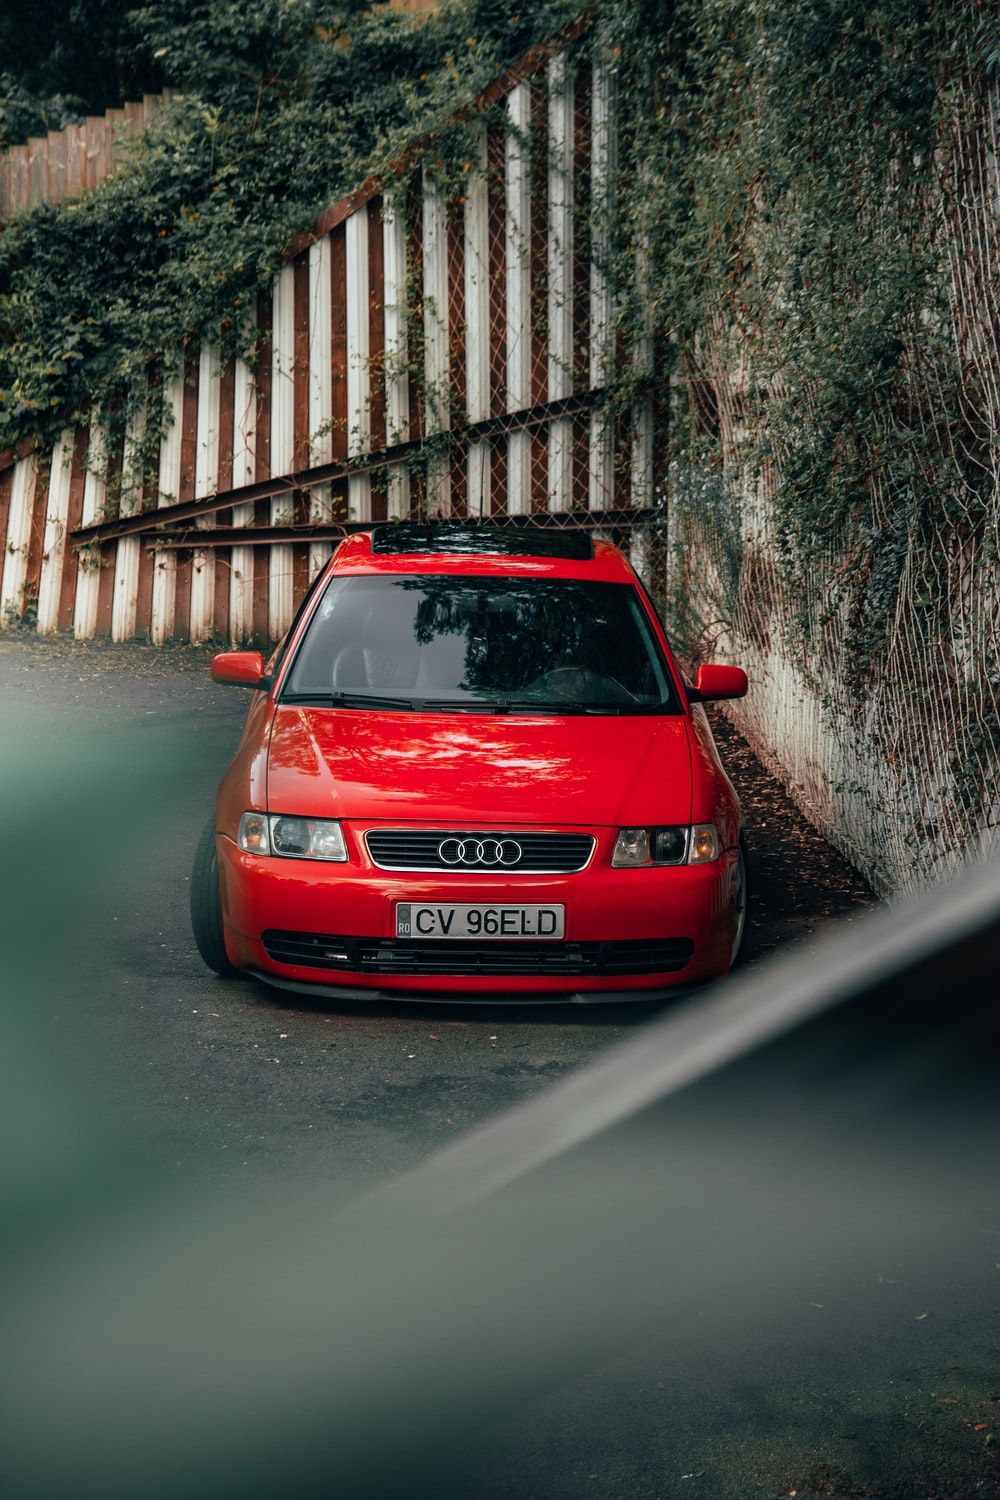 Audi A3 Picture. Download Free Image